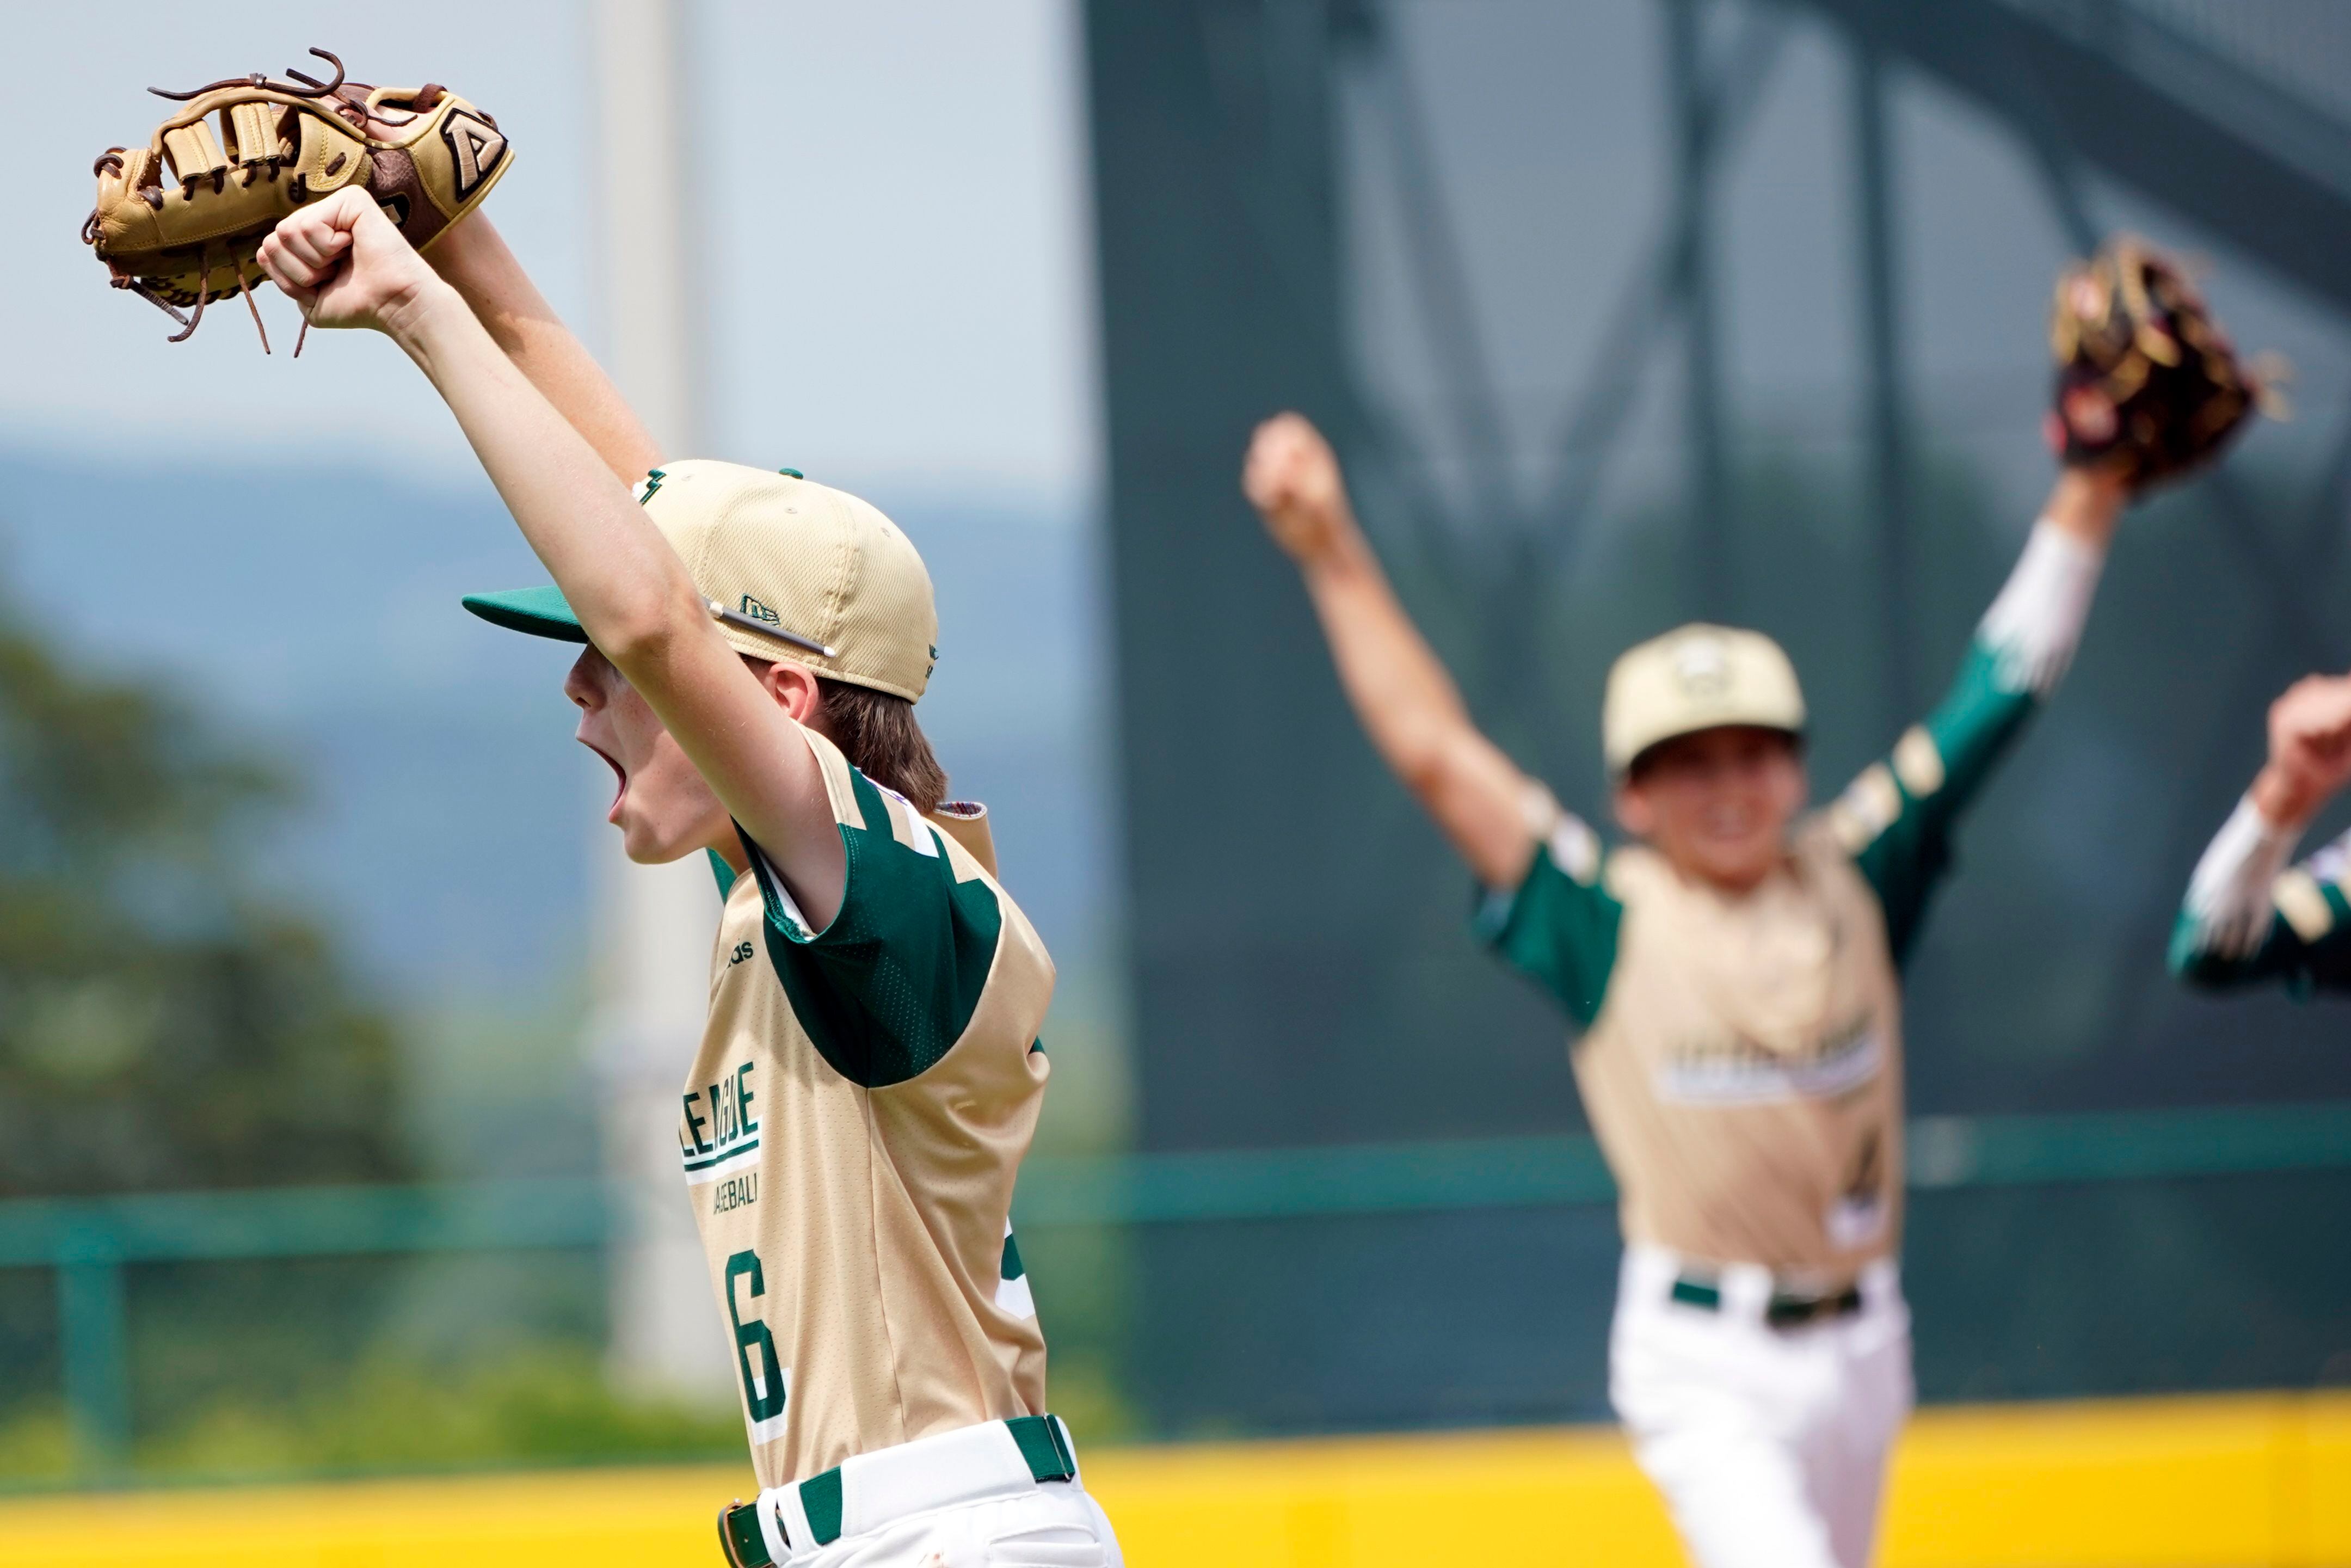 Little League World Series: Lake Oswego team 'trying to have fun' - OPB